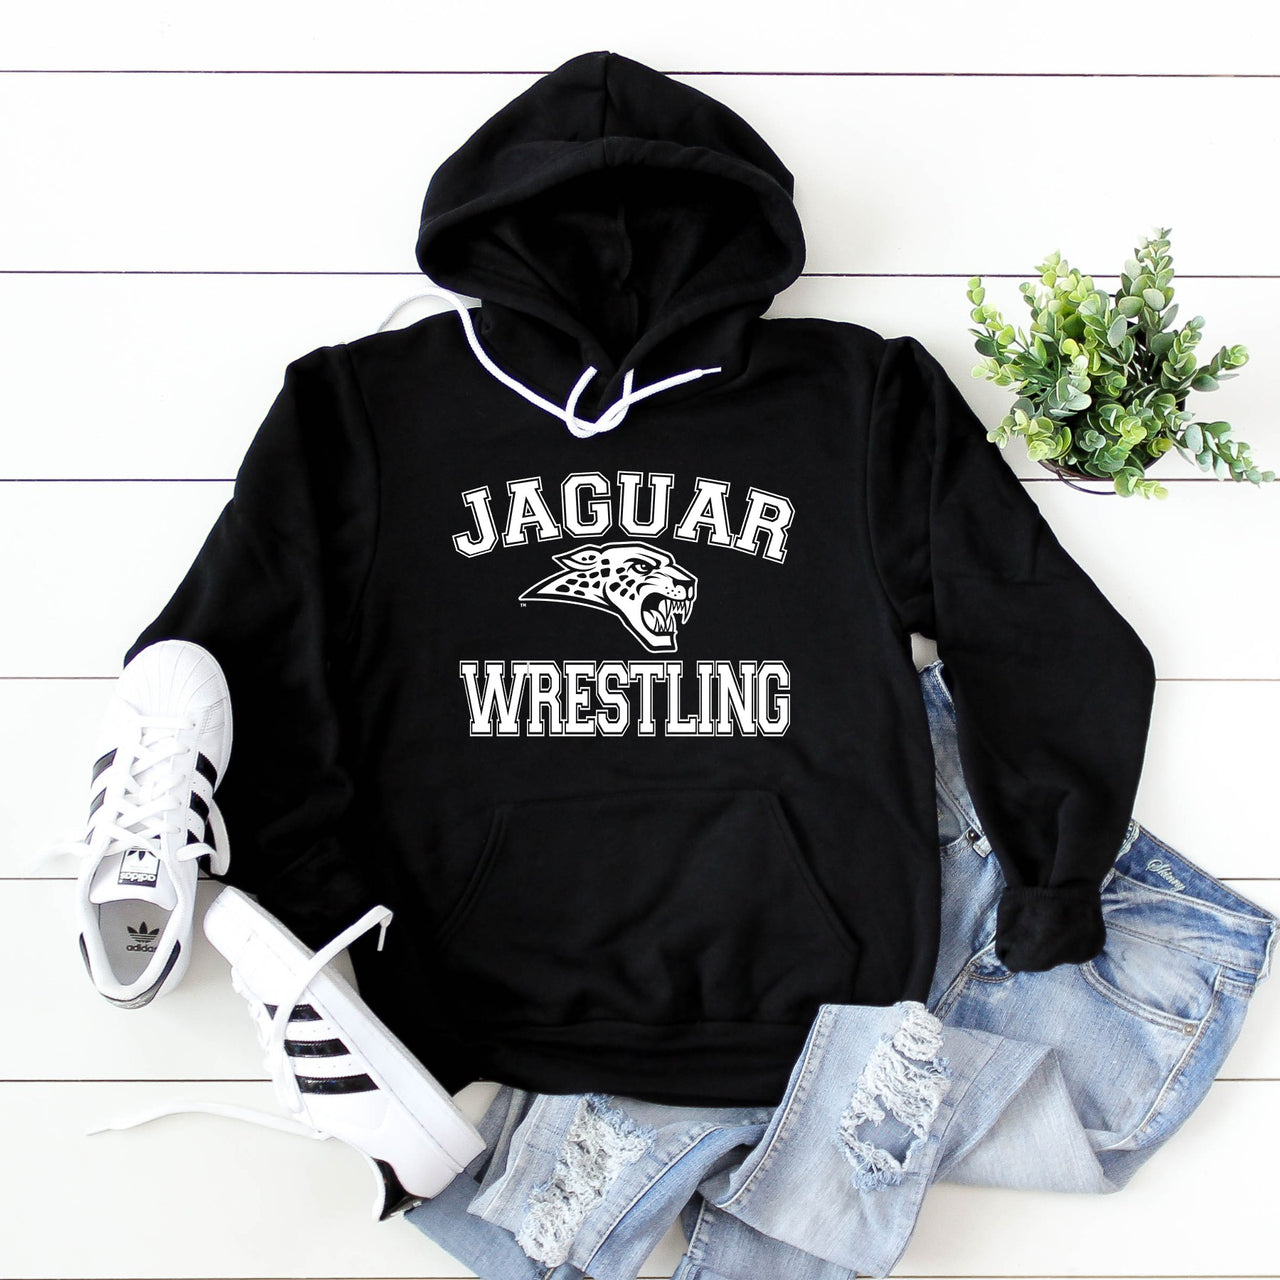 Adult & Youth - Unisex Hooded Pullover Sweatshirt (Centennial Wrestling )